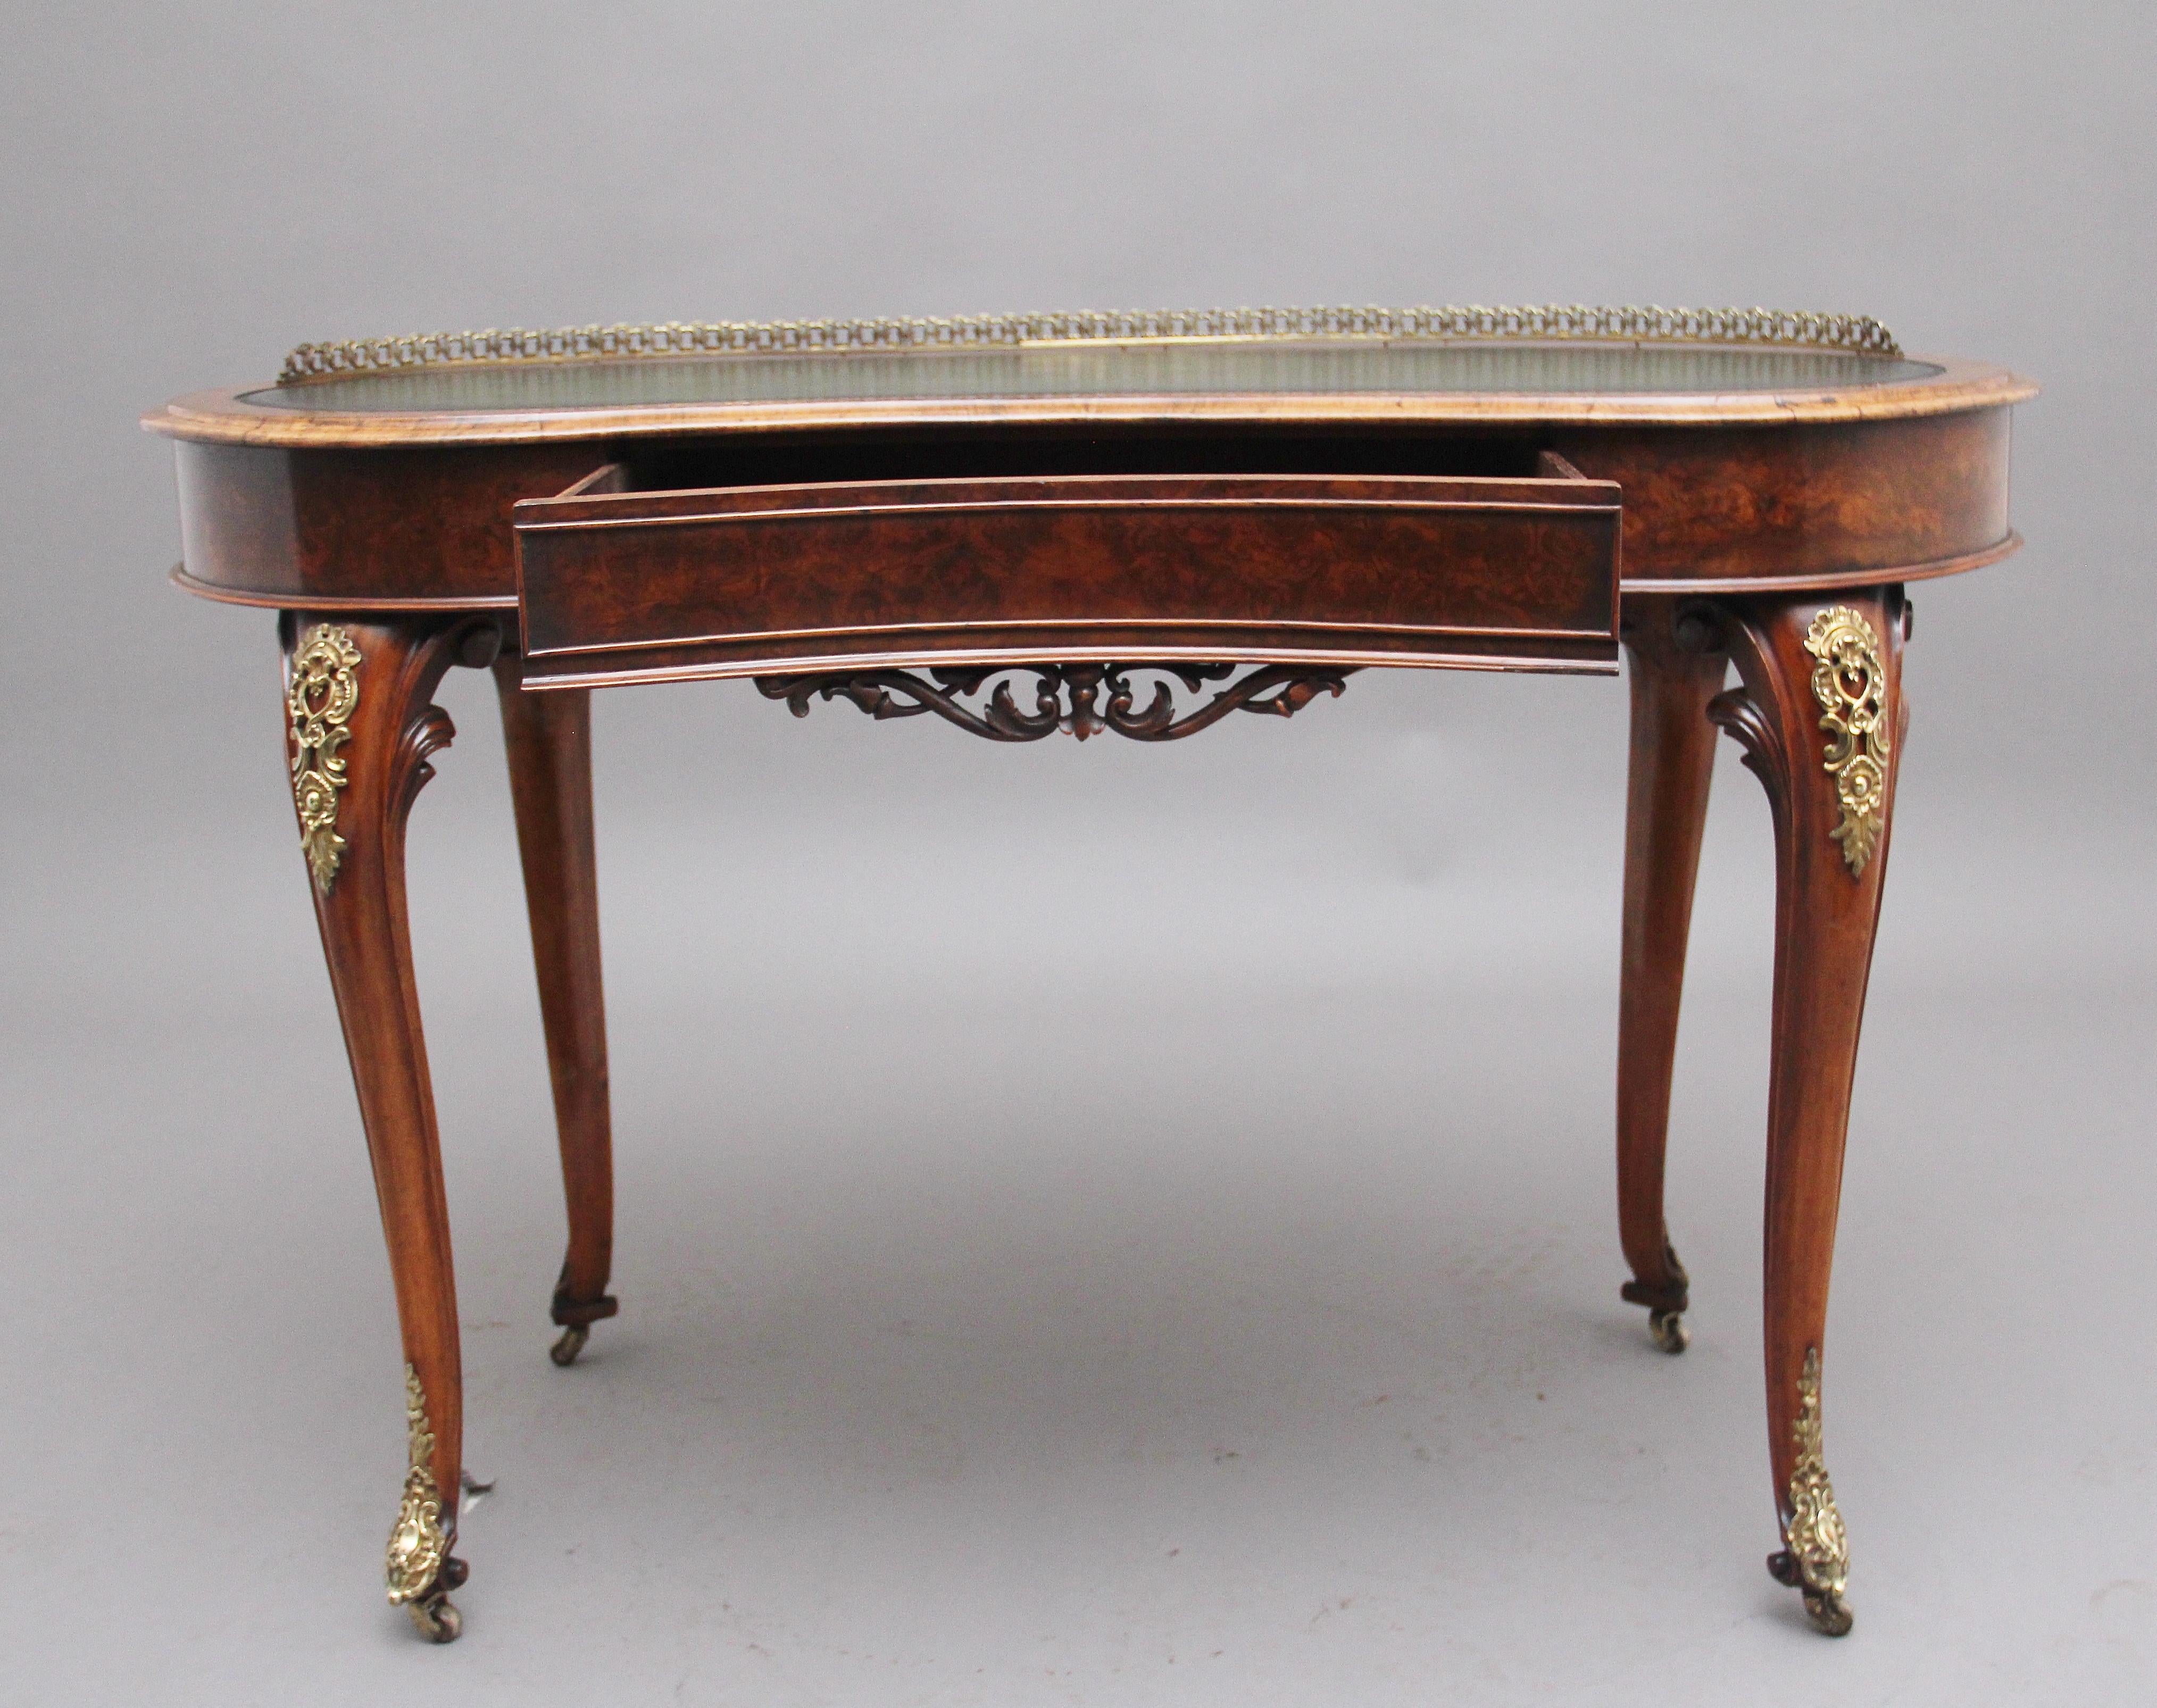 19th Century burr walnut writing table, having a moulded edge kidney shaped top with a green leather writing surface decorated with blind and gold tooling, the back of the top having a pierced brass gallery, the frieze below having a single mahogany